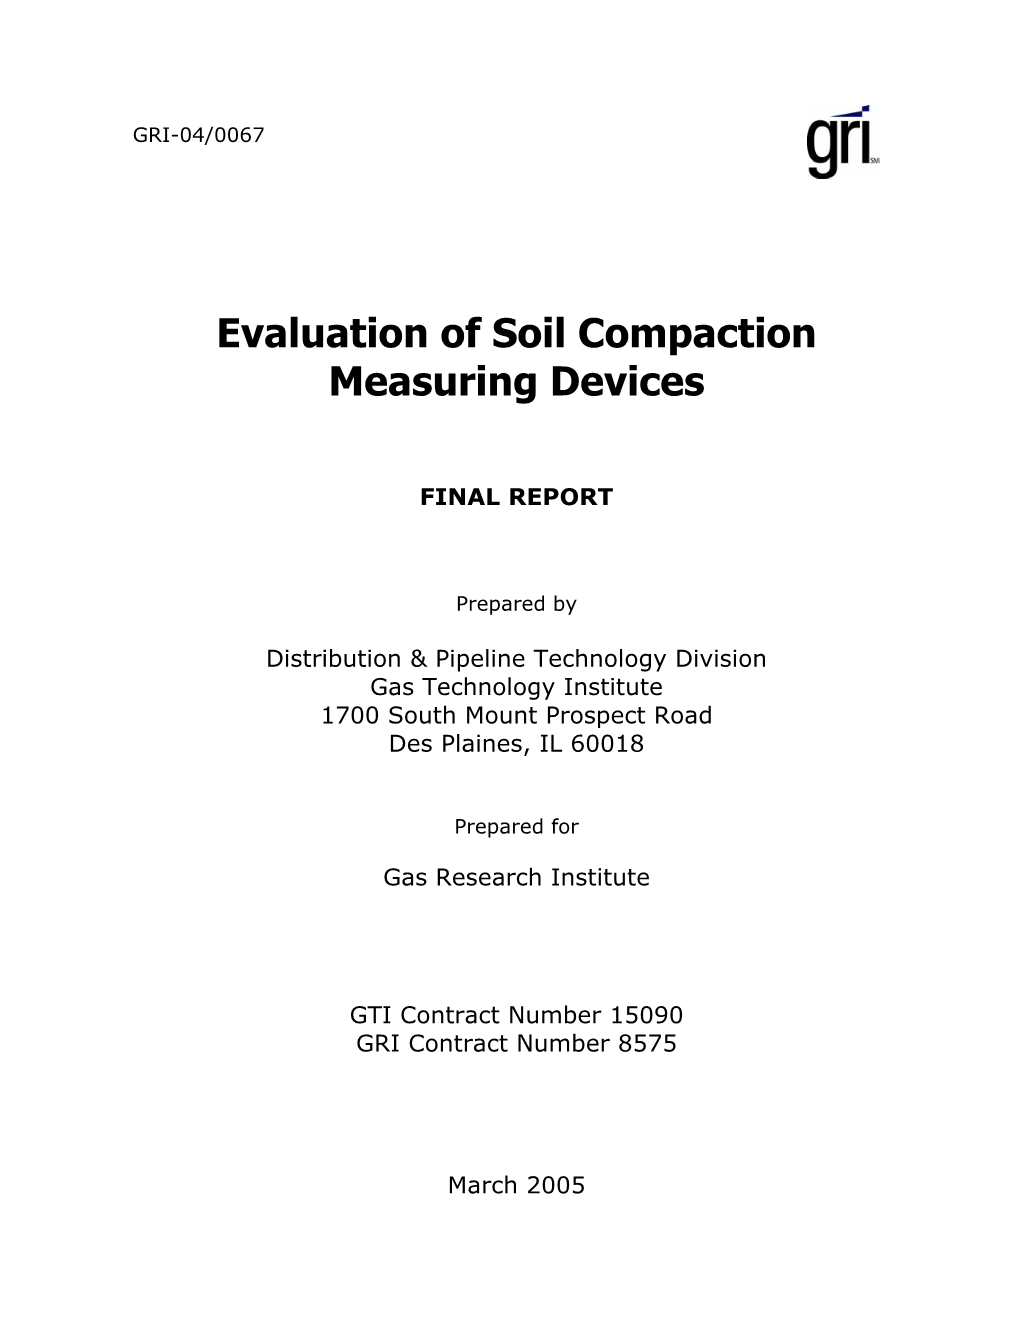 Evaluation of Soil Compaction Measuring Devices